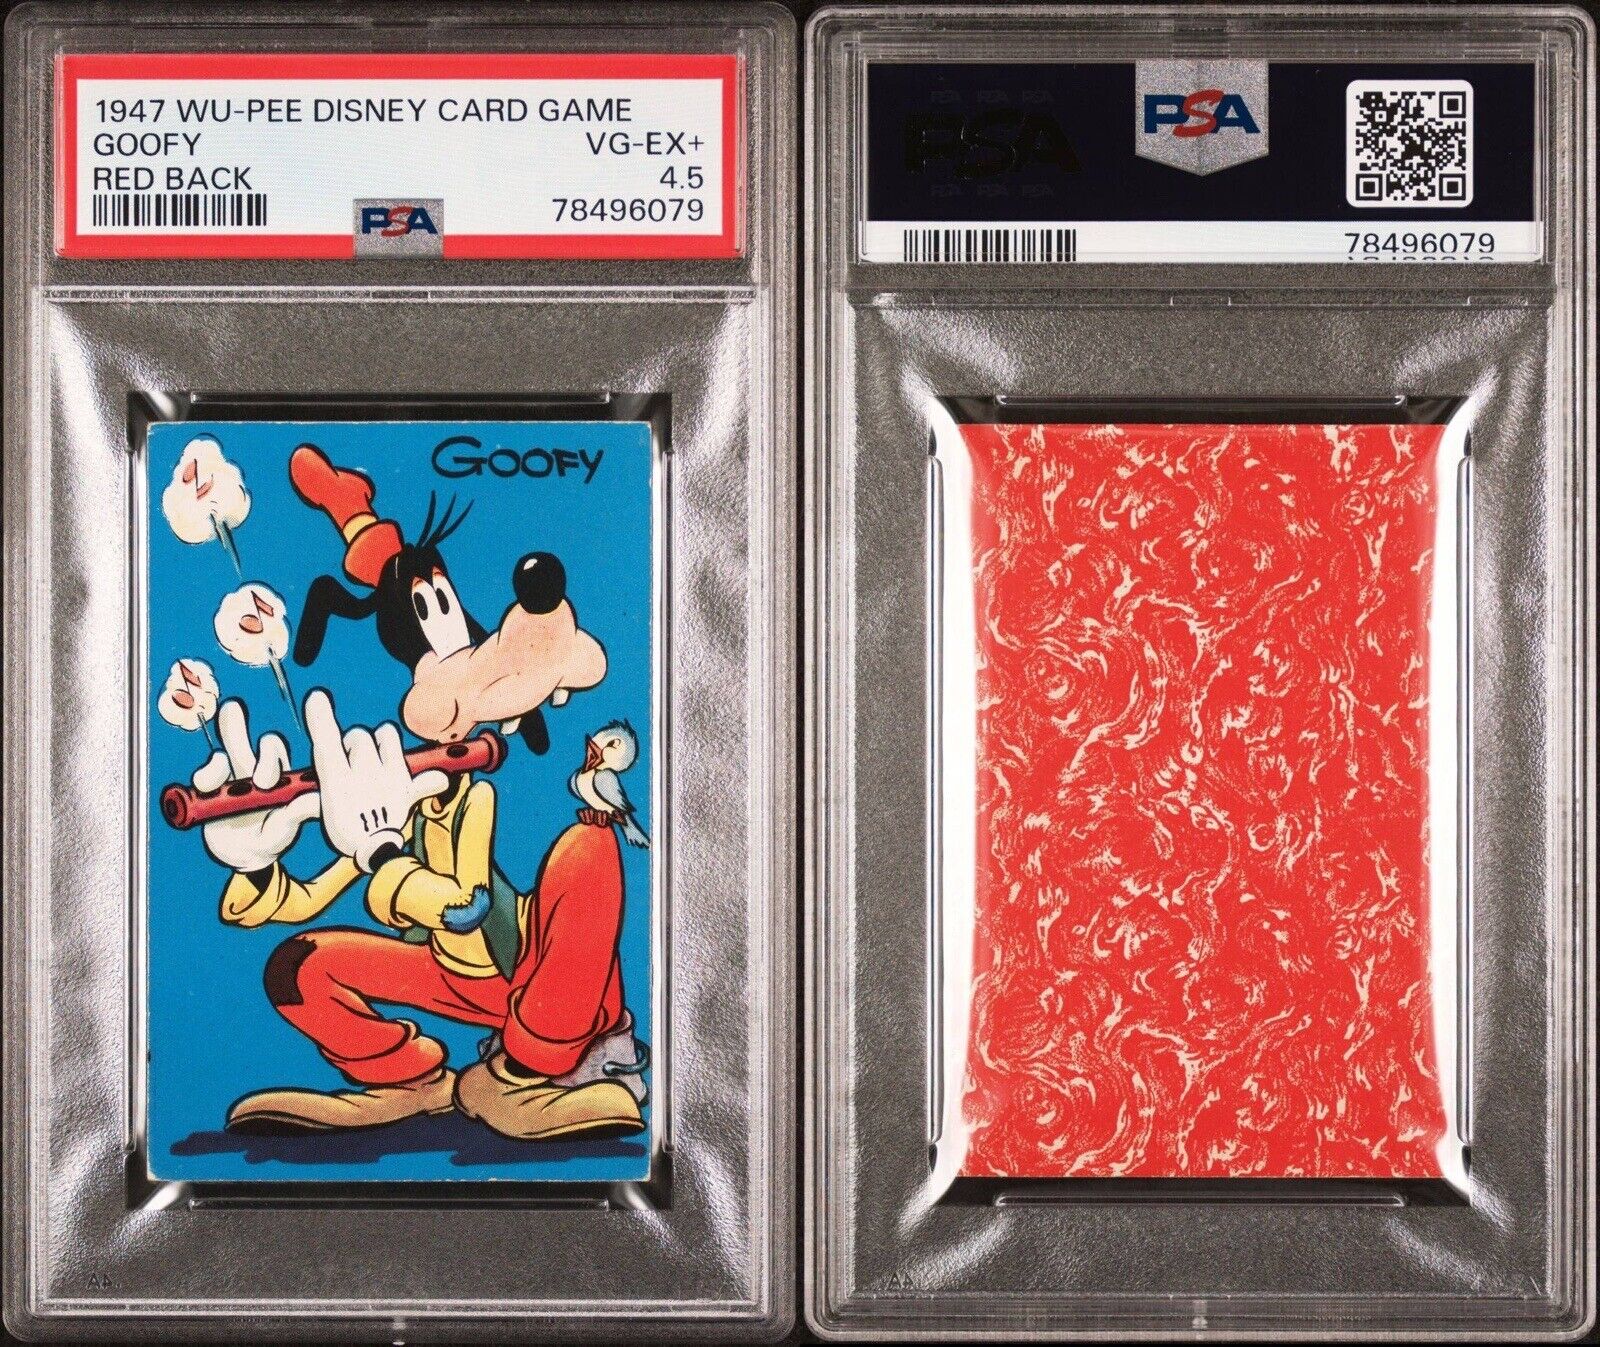 EXTREMELY RARE 1947 WU-PEE DISNEY CARD GAME GOOFY CARD PSA 4.5 VG-EXCELLENT+